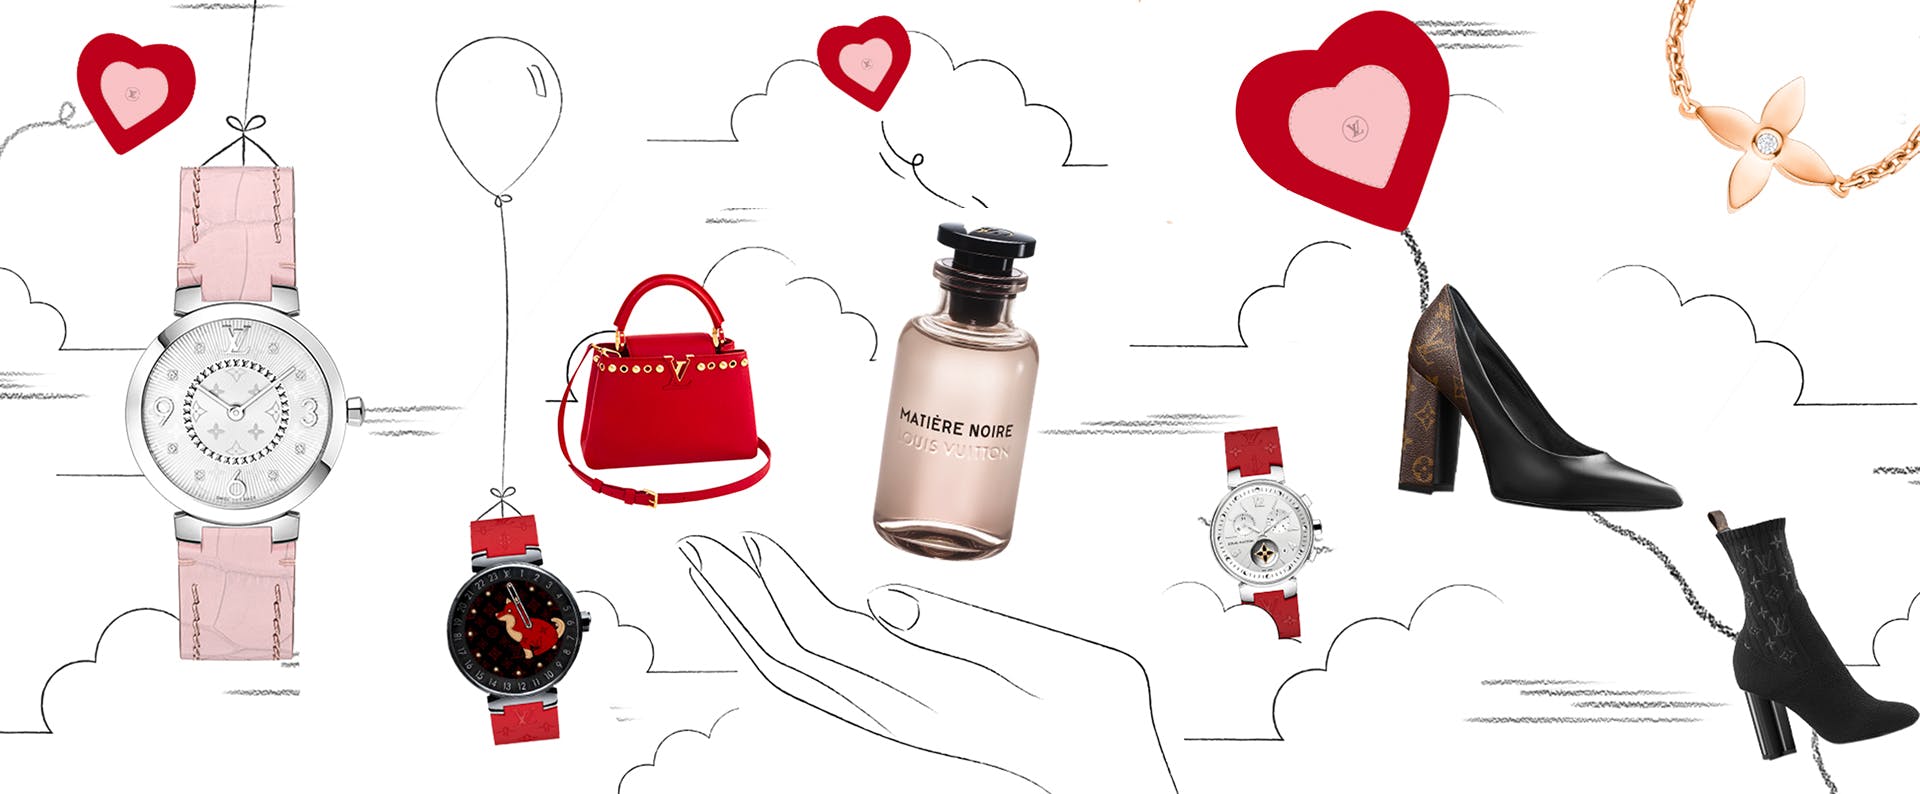 Louis Vuitton unveils its Valentine's Day collection for 2018 in a special  clip